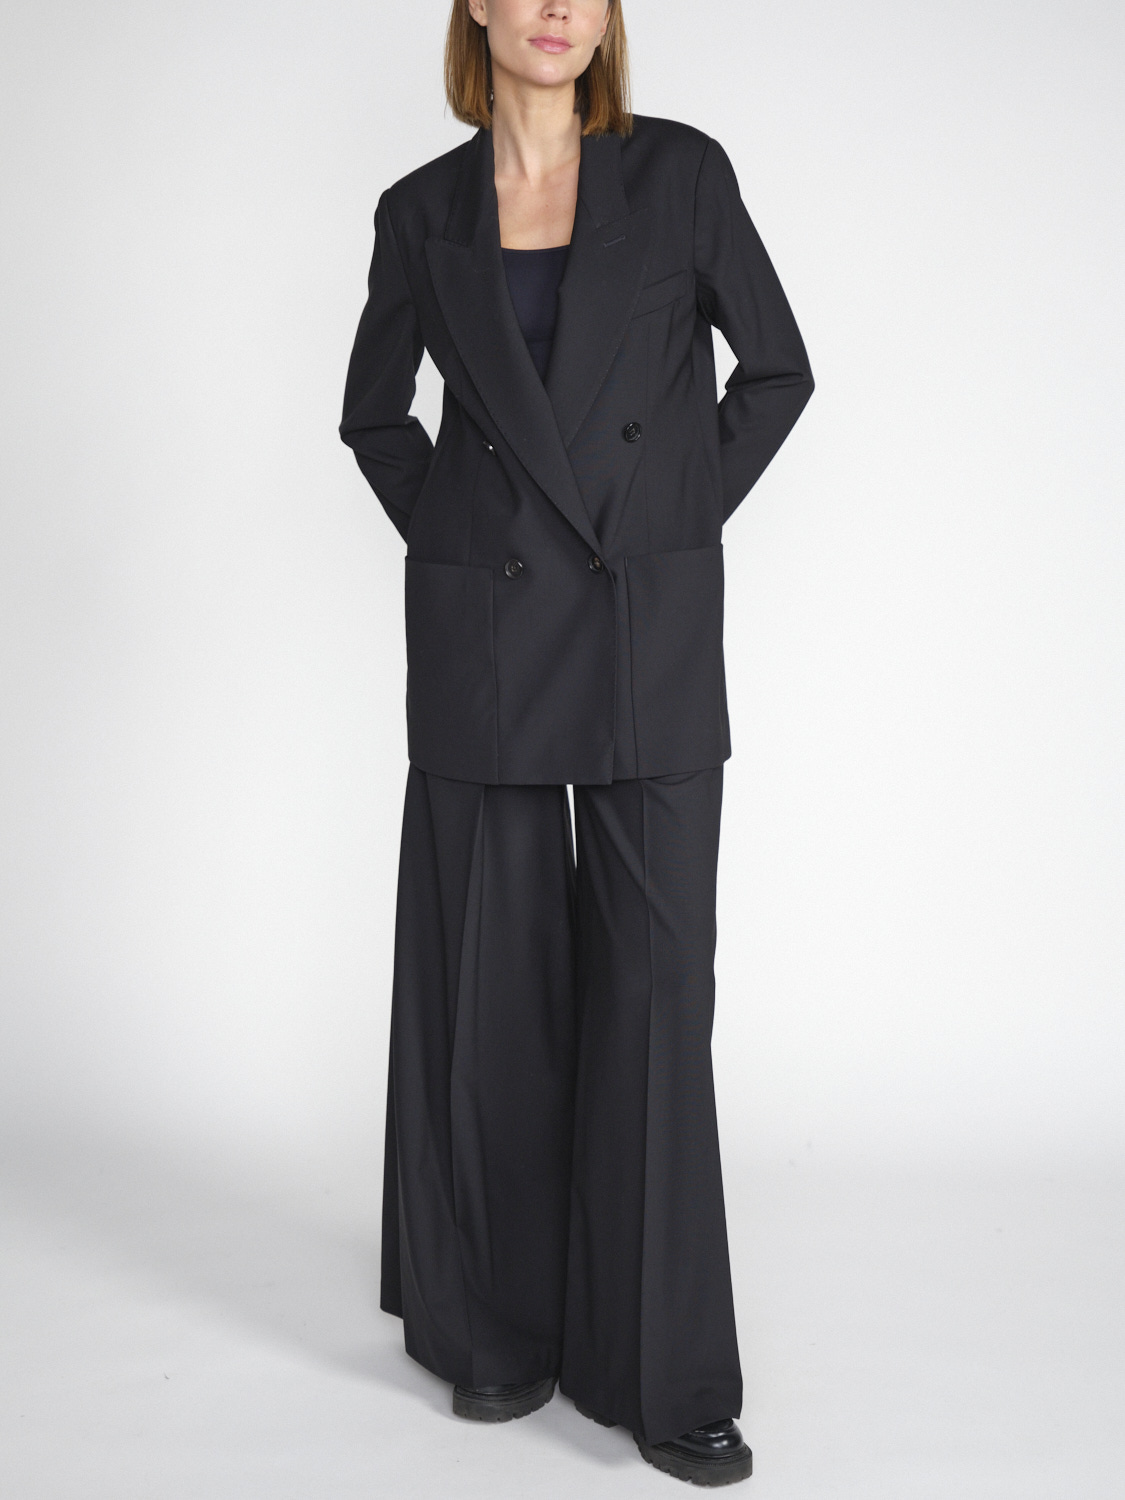 Lorena Antoniazzi Double-breasted blazer in virgin wool and stretch  black 34